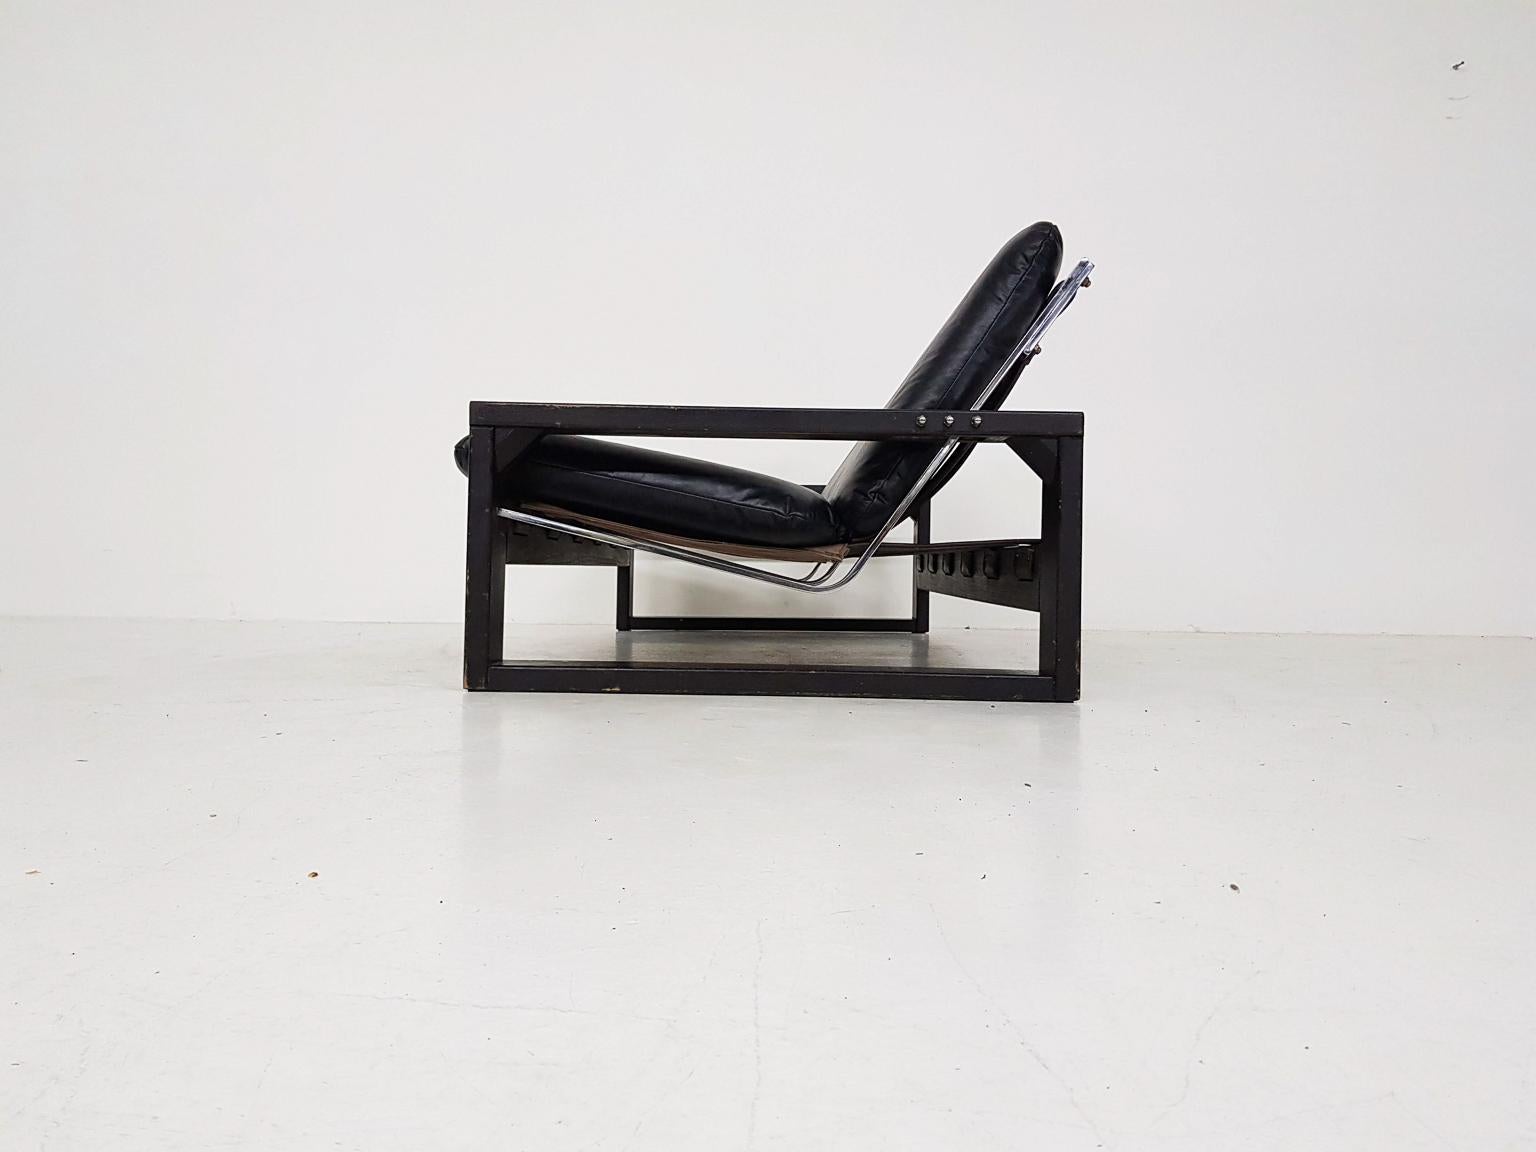 Beautiful Brutalist two-seat sofa by Dutch designer Sonja Wasseur. Made and designed in the Netherlands in the 1970s.

This sofa was handmade by Dutch artist Sonja Wasseur. Because not many were made, it is truly a unique piece of furniture from